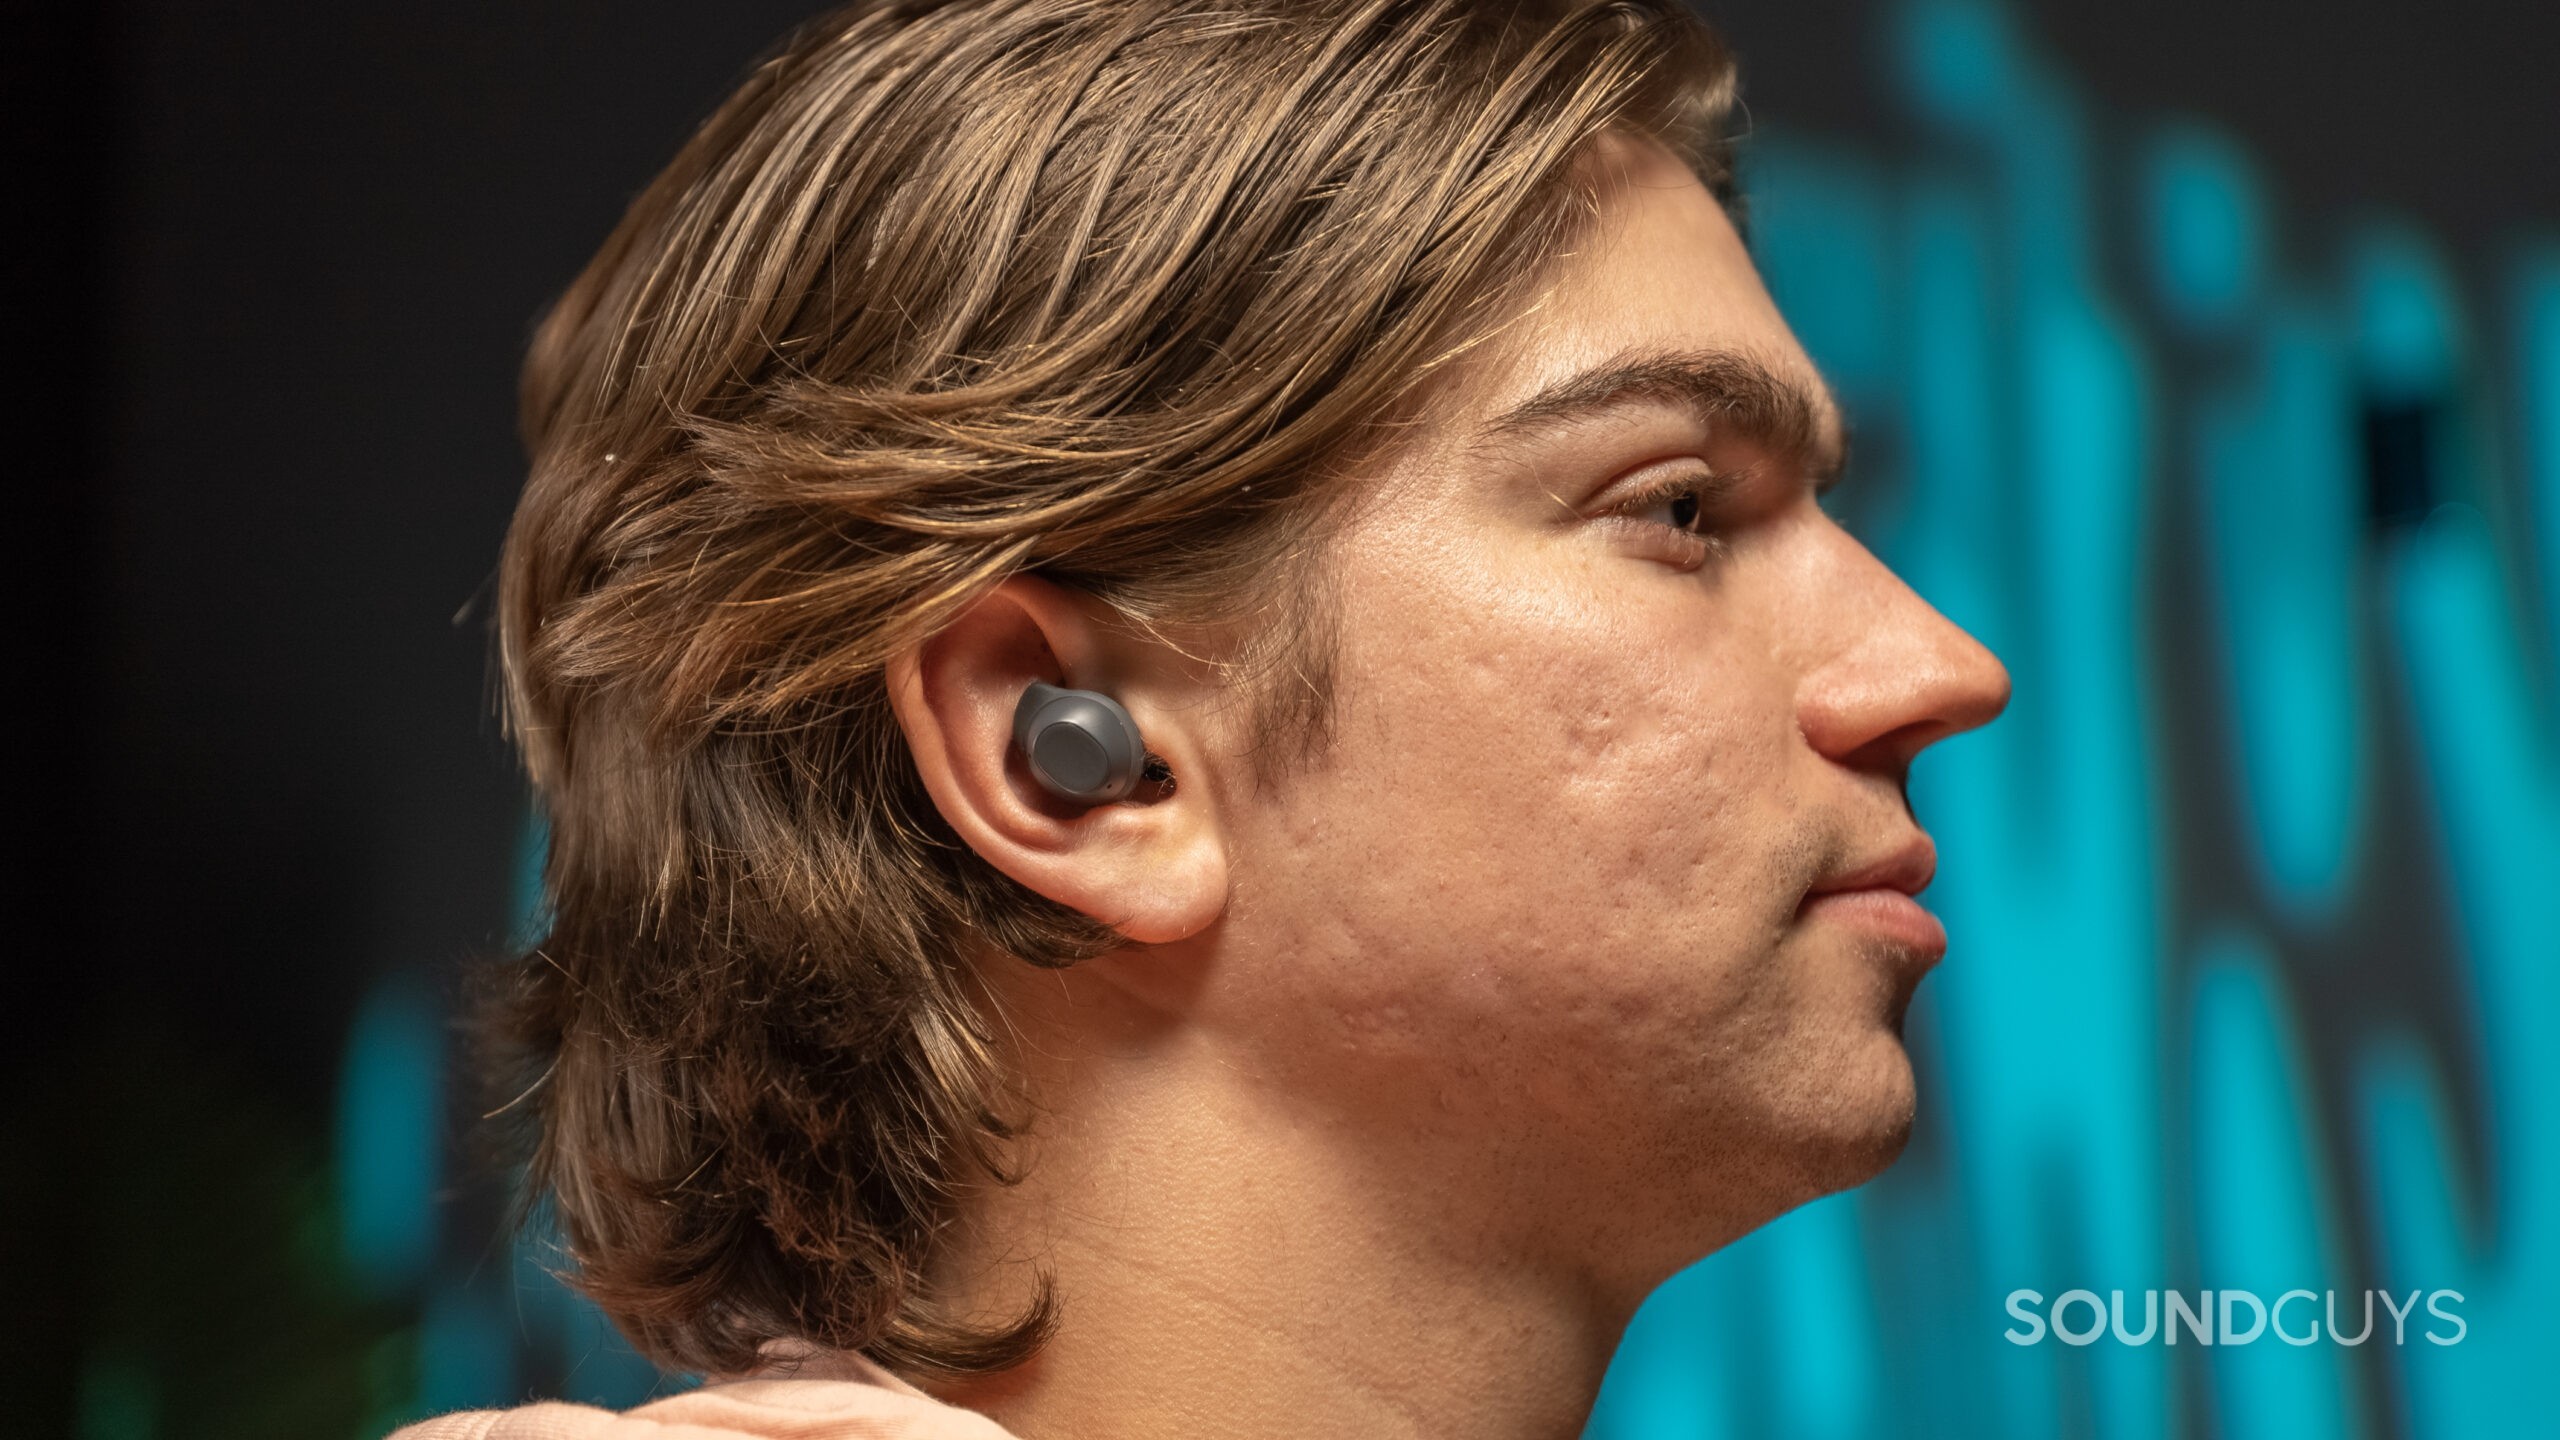 The Samsung Galaxy Buds FE being worn by a man with longer hair.